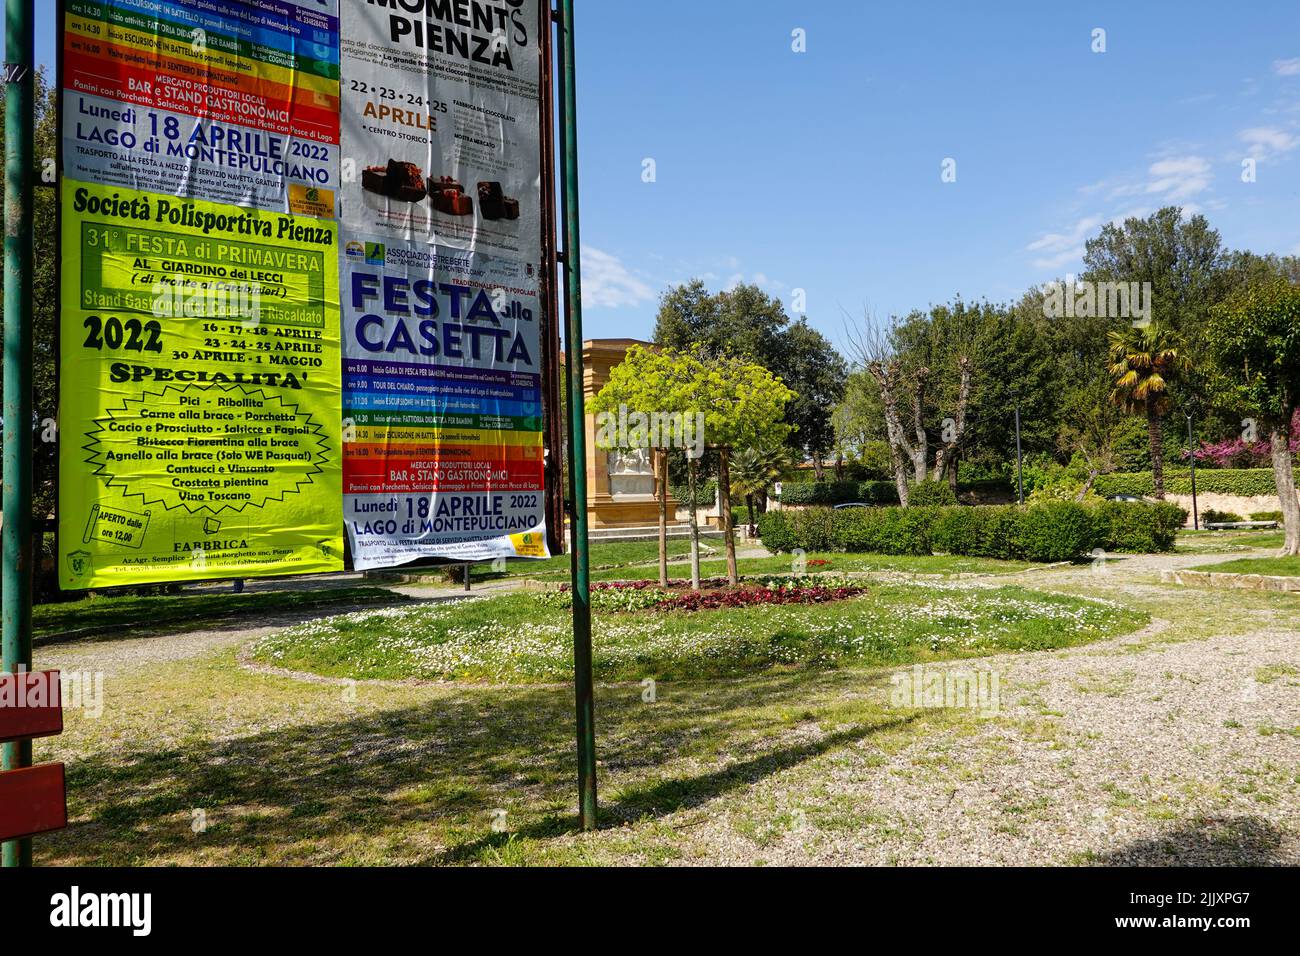 Sign in the central park advertising spring events in Pienza, Italy and the surrounding Tuscan area. Stock Photo